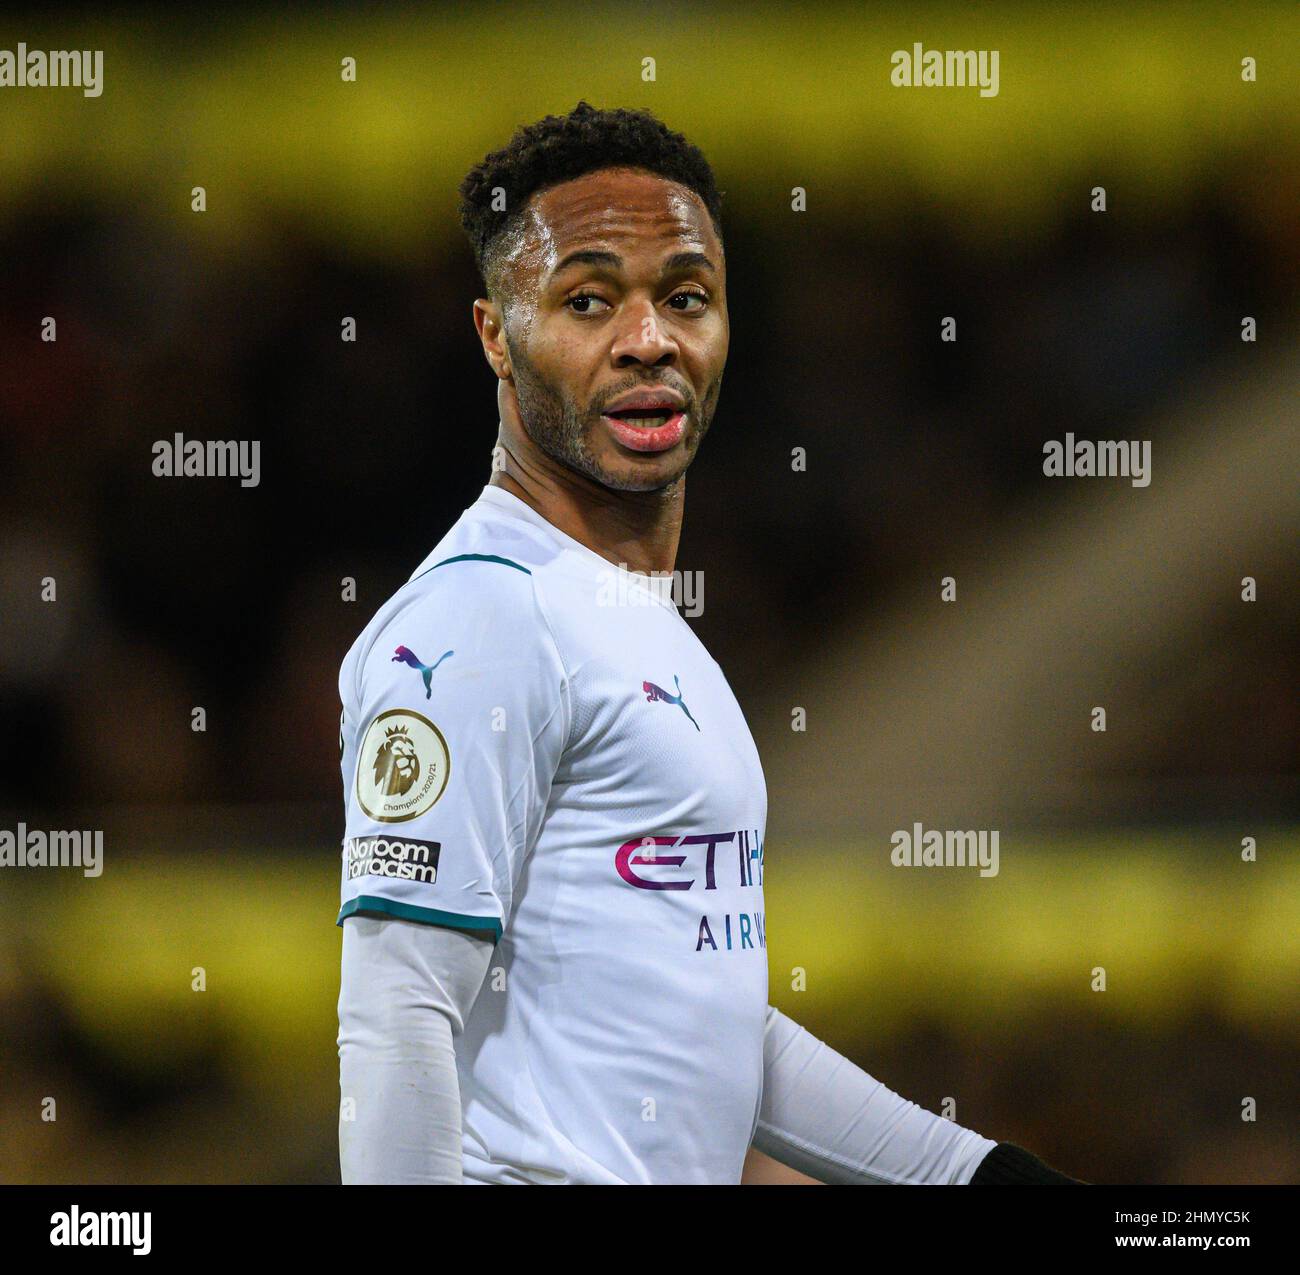 Norwich, UK. 12th Feb, 2022. 12 February 2022- Norwich City v Manchester City - Premier League - Carrow Road Manchester City's Raheem Sterling during the match against Norwich City at Carrow Road. Picture Credit : Credit: Mark Pain/Alamy Live News Stock Photo